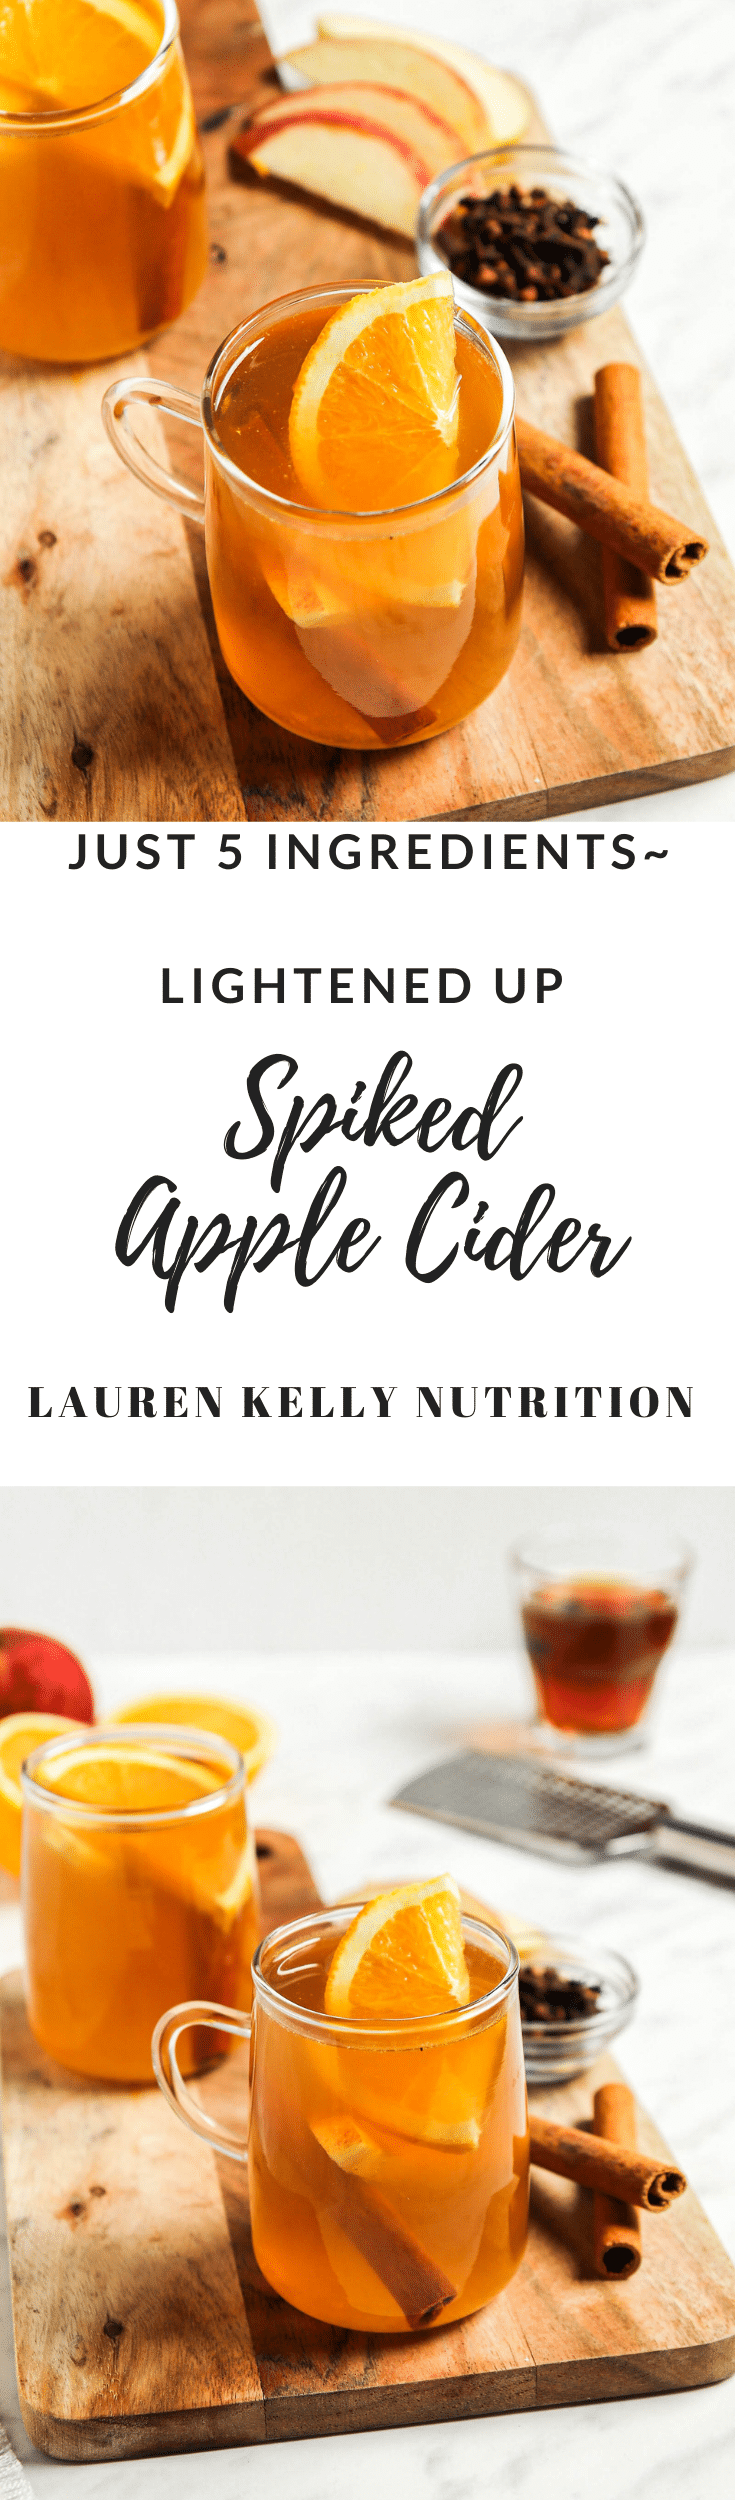 With just 5 simple ingredients, you can enjoy this lightened up Spiked Apple Cider!